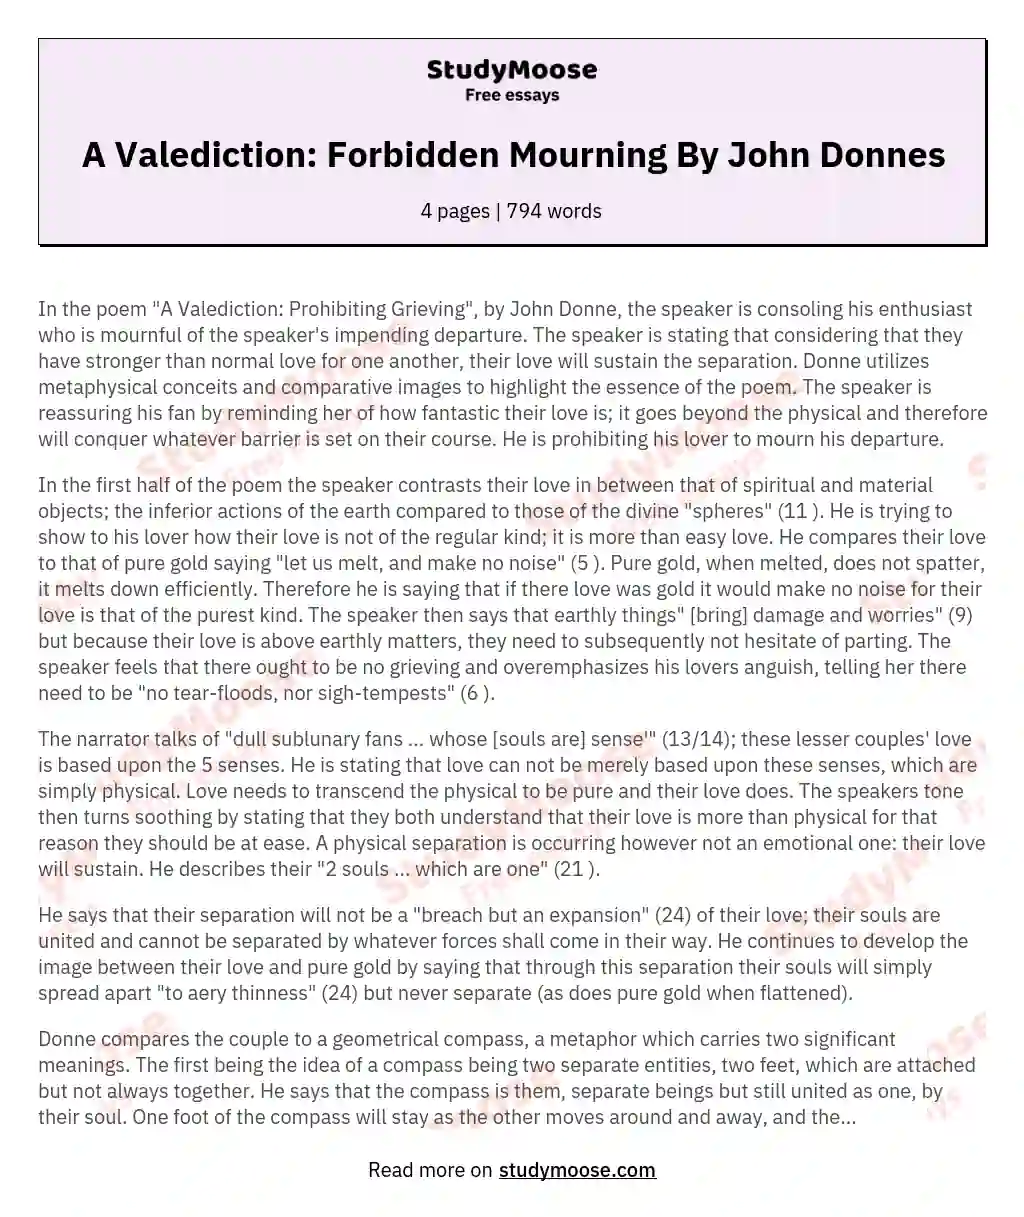 A Valediction: Forbidden Mourning By John Donnes